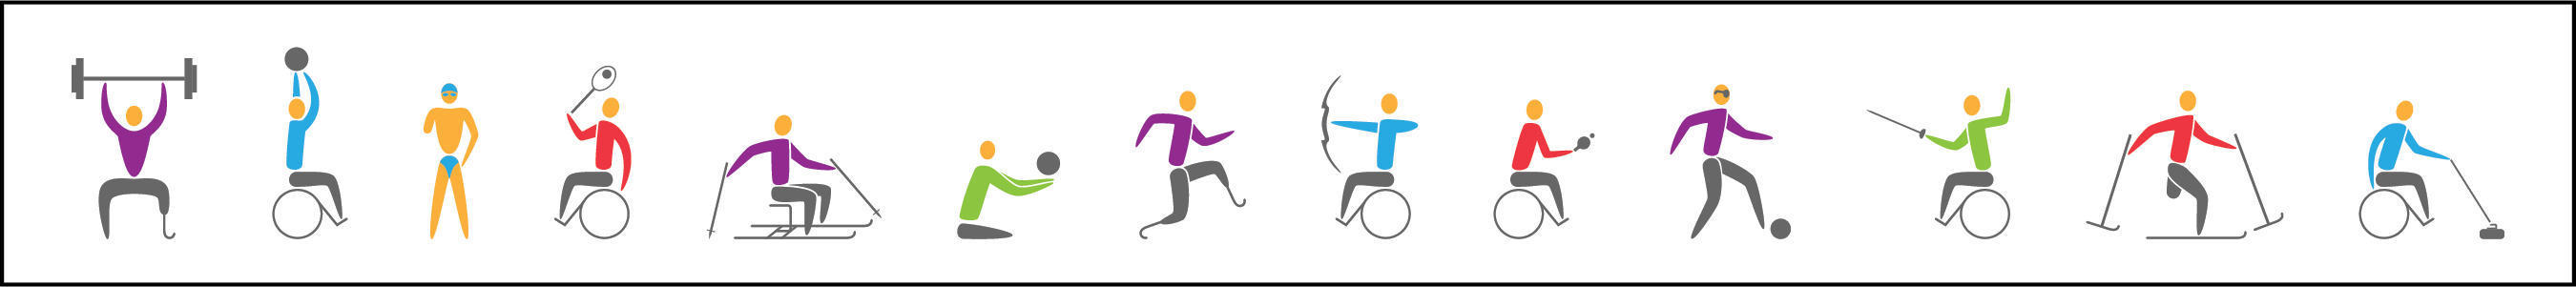 Graphic of stylized images of people with disabilities doing sports